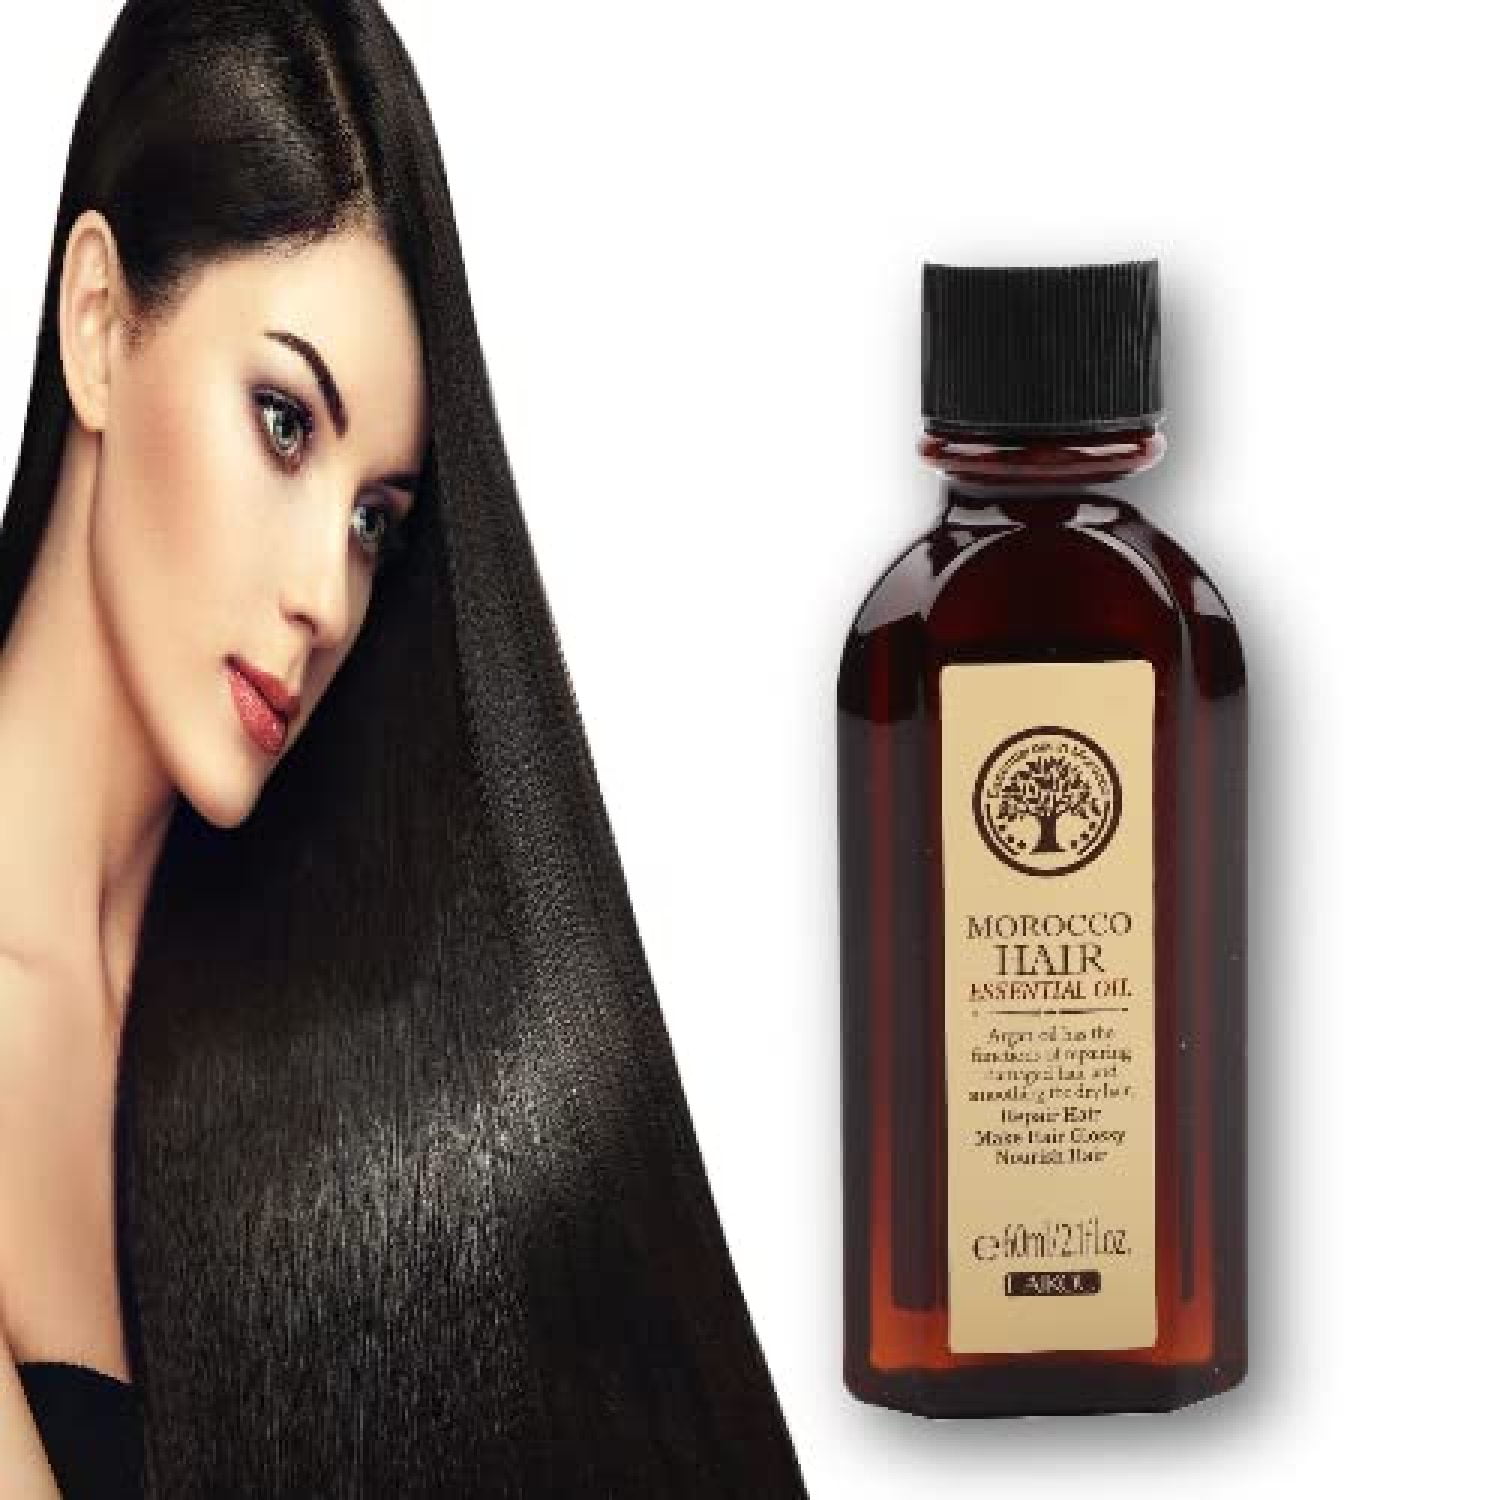 Tips for Applying Hair Serum for Maximum Benefits – The Natural Wash